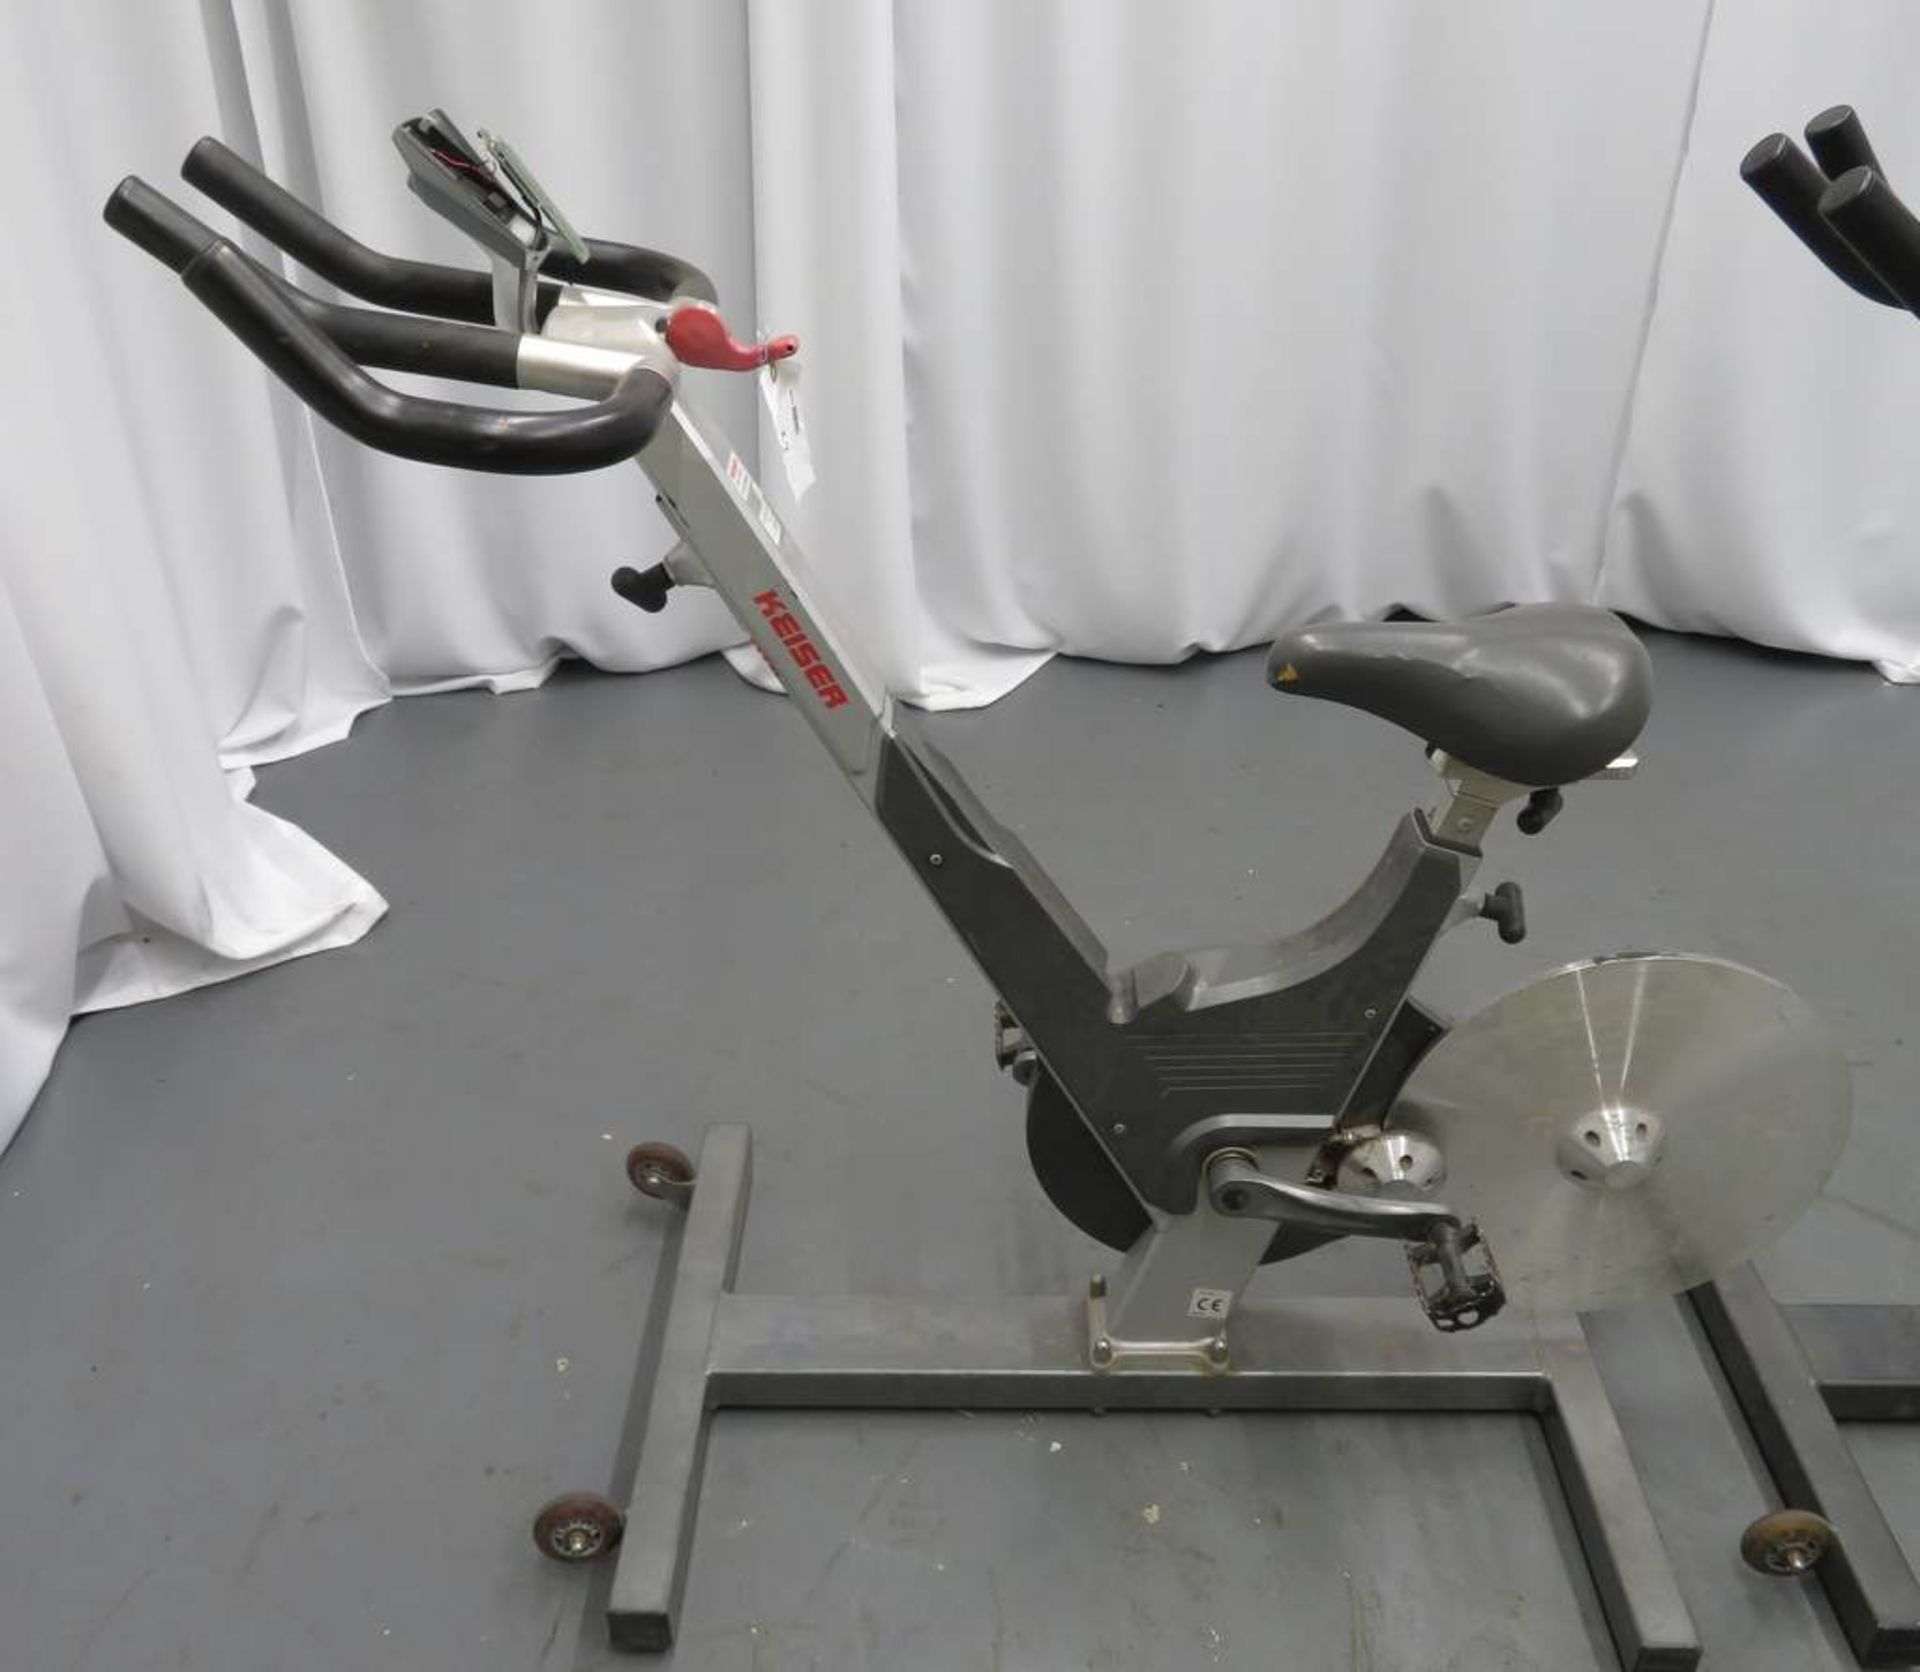 2x Keiser M3 Spinning Bike, Complete With Digital Console (damaged) & Adjustable Seat. - Image 2 of 10